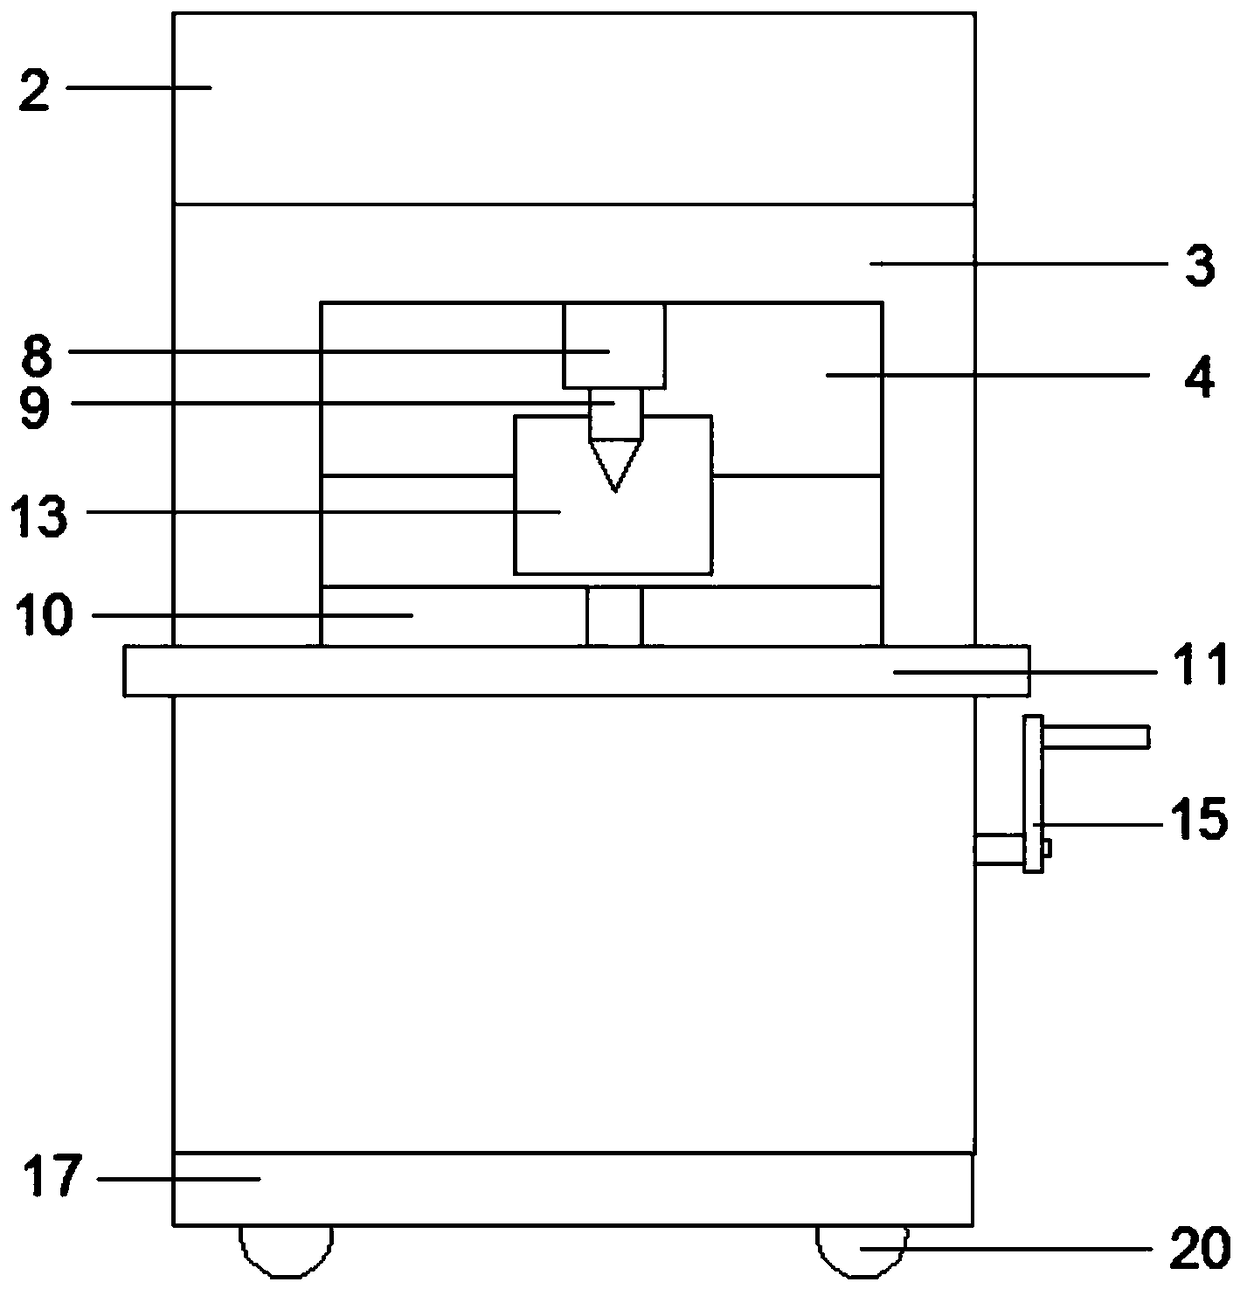 Anti-seismic perforating machine with adjustable observation direction for engineering building detection